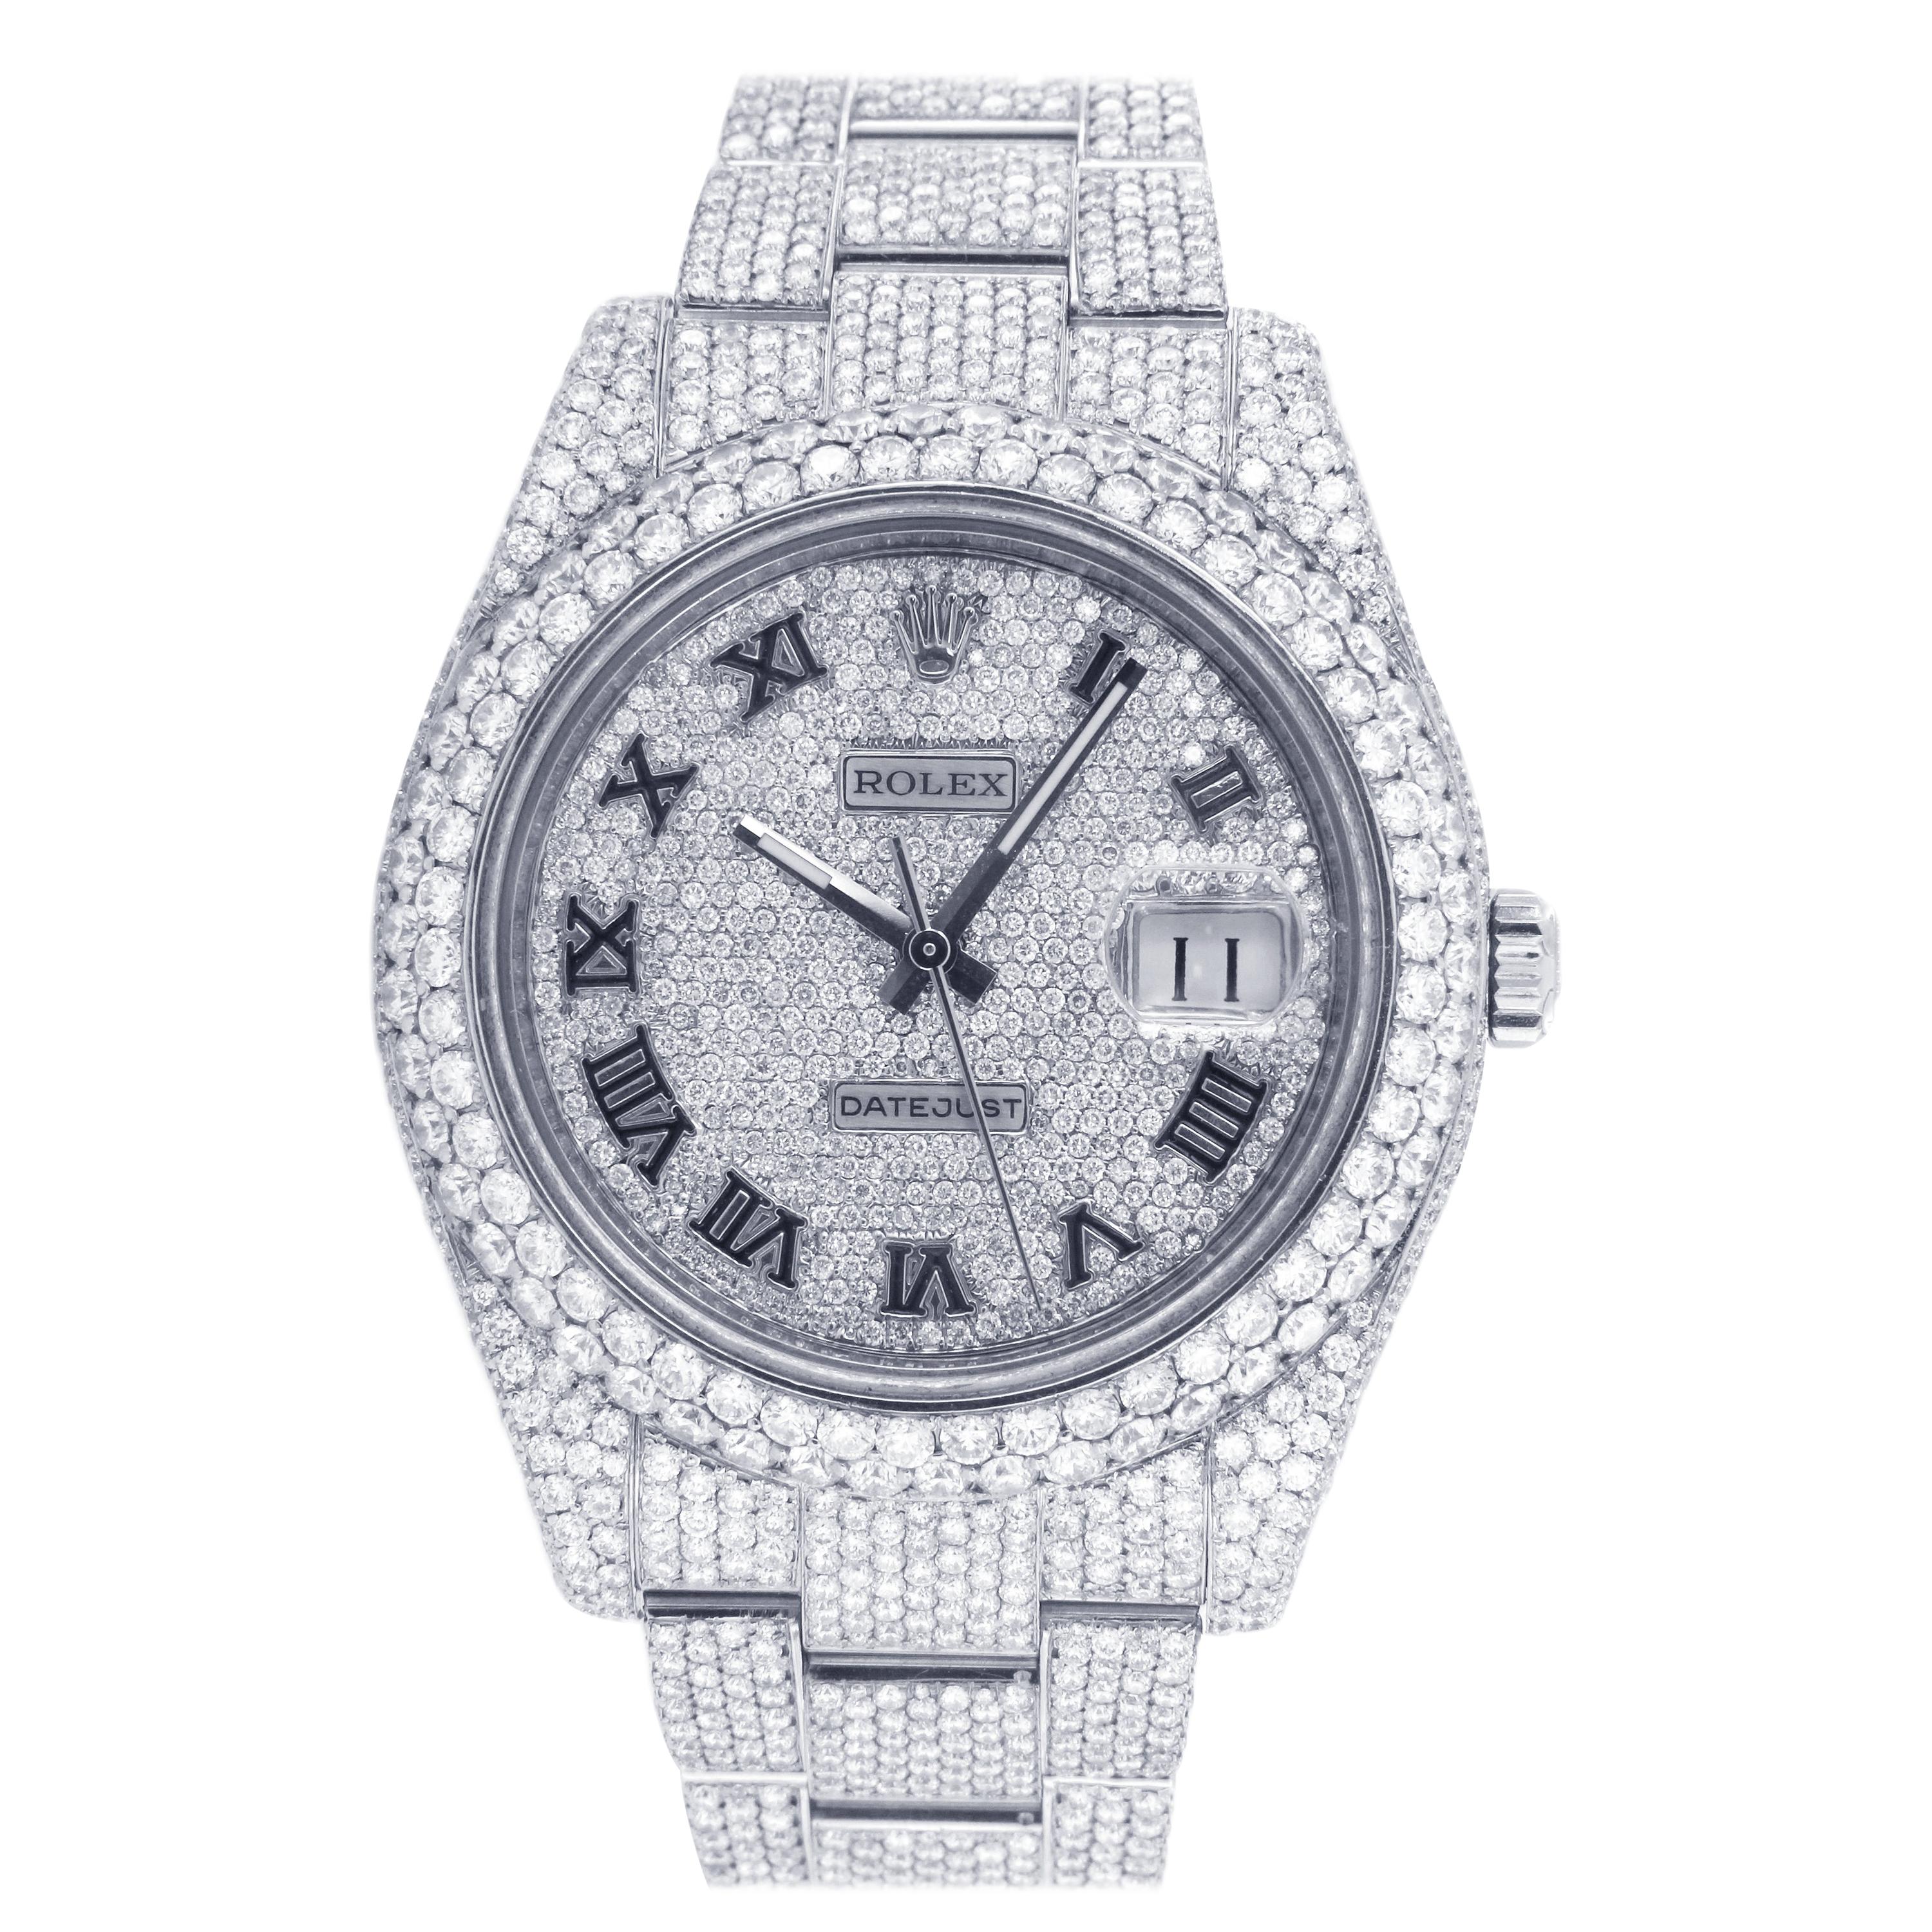 Rolex Datejust II Roman Numeral Dial Aftermarket Diamond Watch For Sale